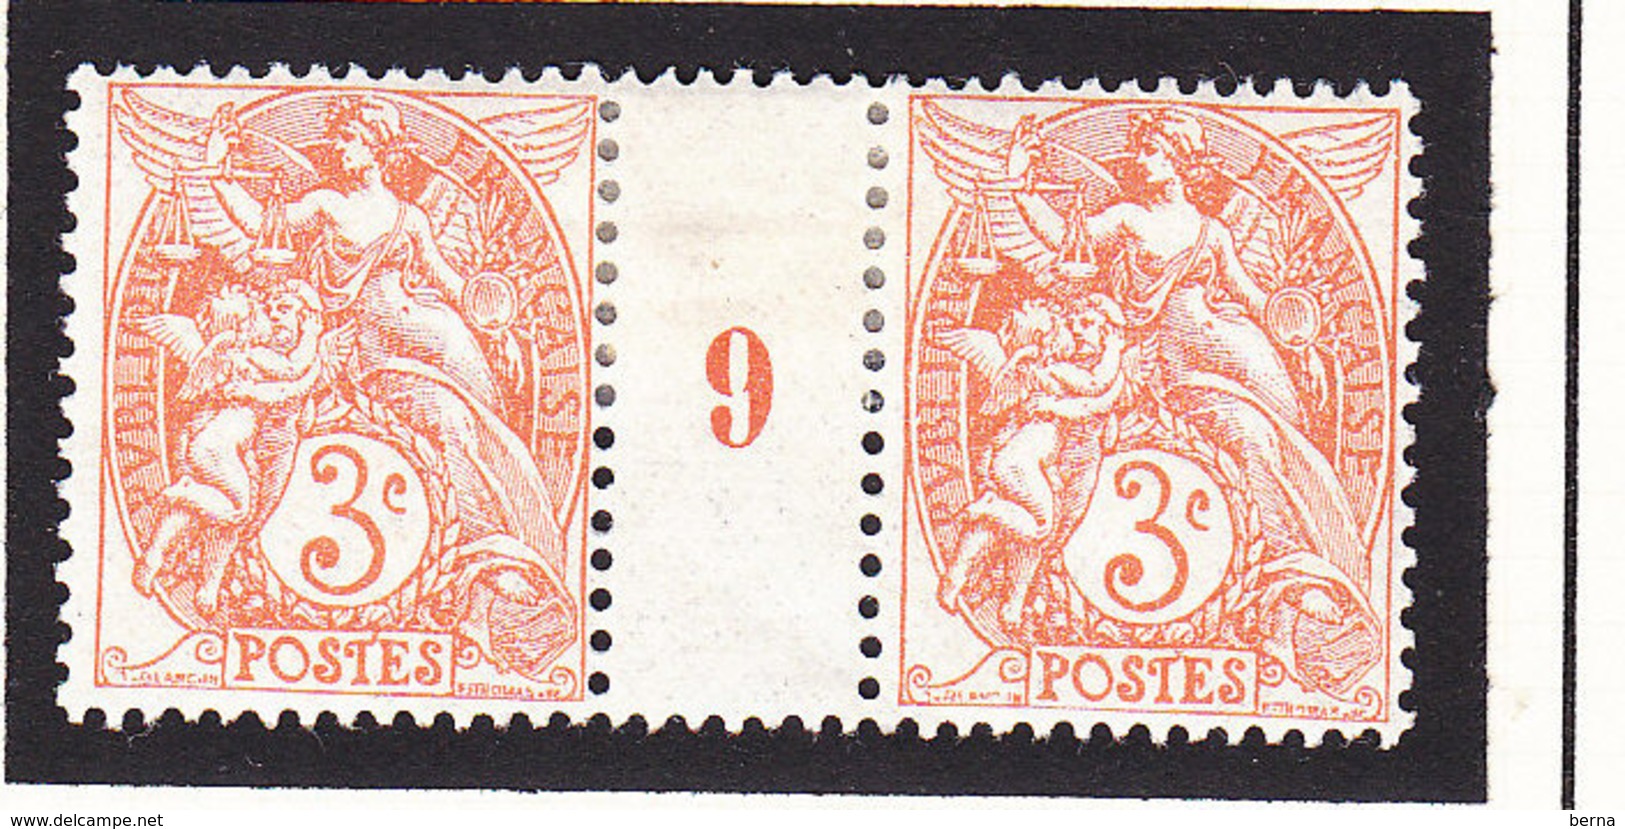 FRANCE 109 PAIRE MILL 9 TYPE IB NEUF CHARNIERE - Millésime